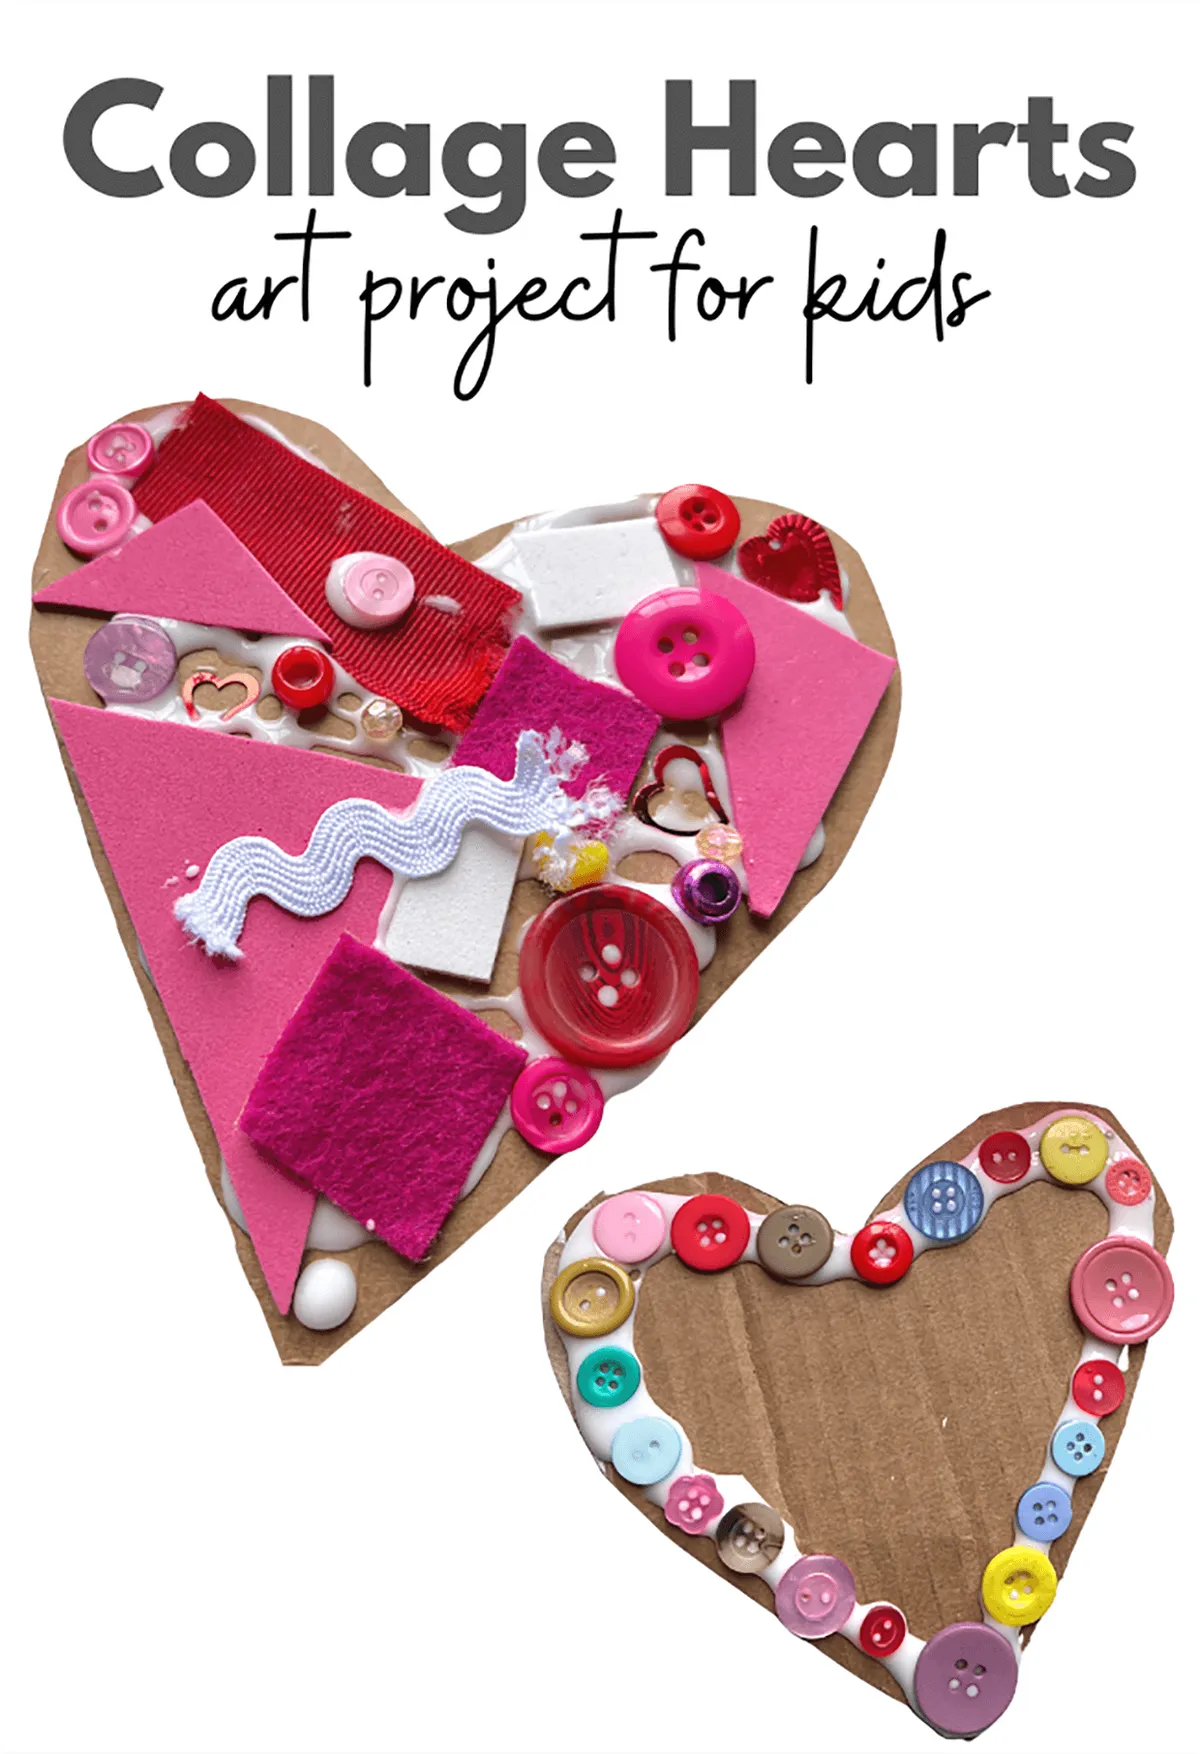 Paper hearts decorated with scrap materials like buttons - valentines crafts for kids